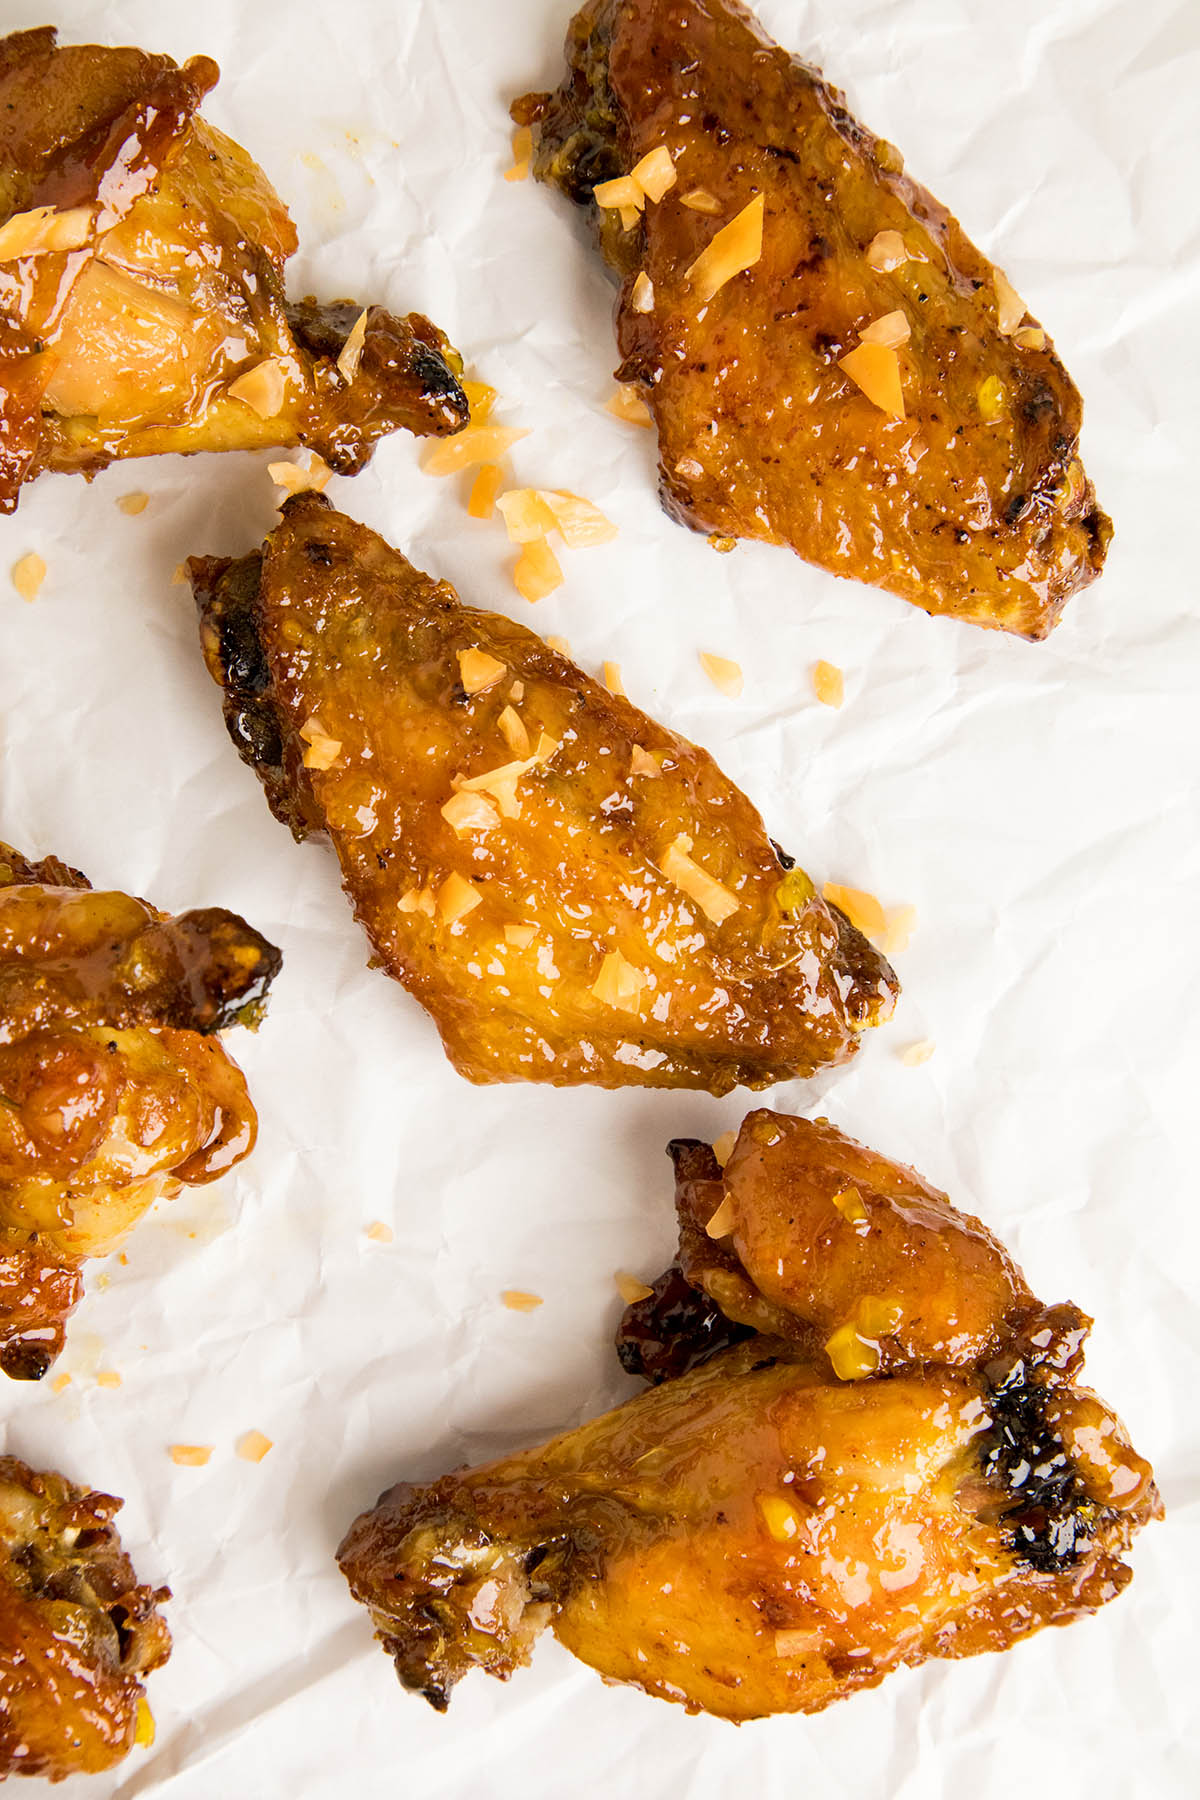 Sticky Habanero Glazed Chicken Wings looking super delicious